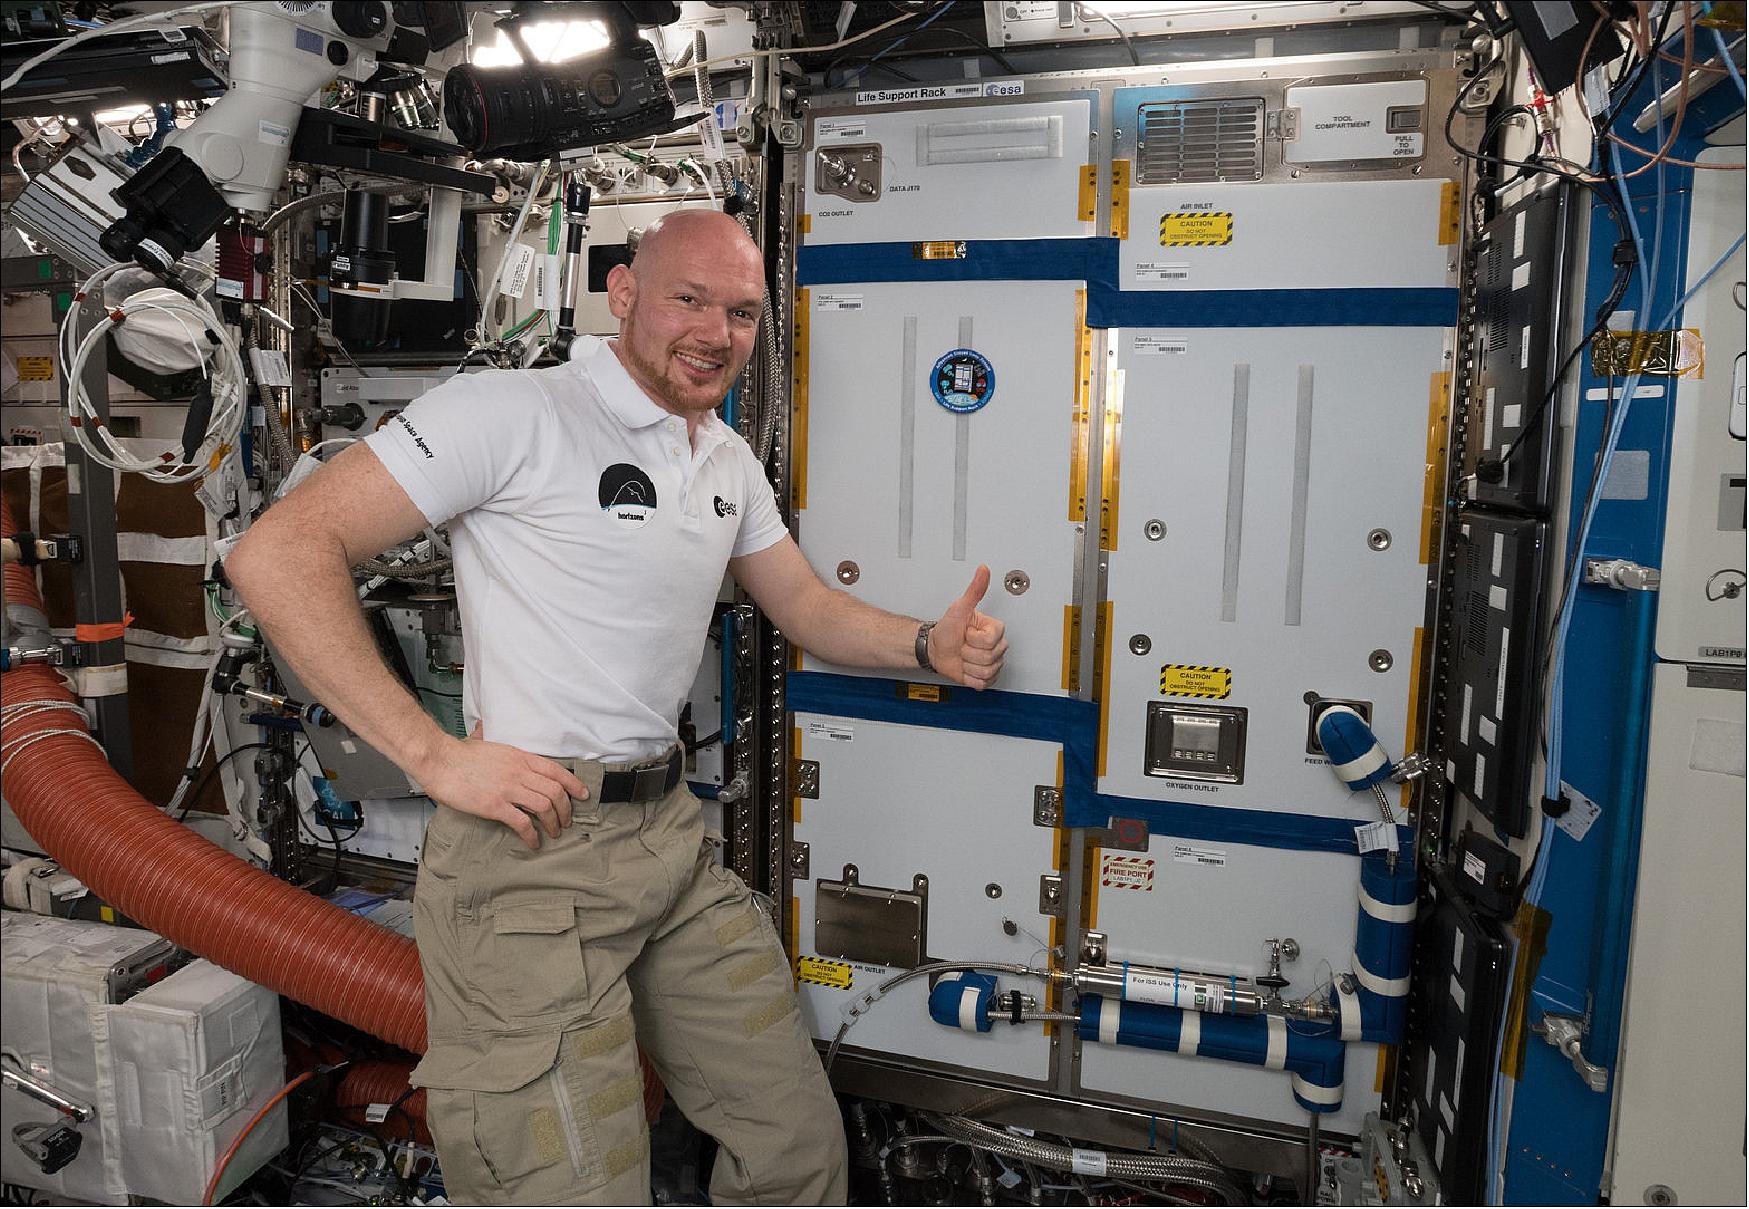 Figure 10: ESA astronaut Alexander Gerst after installing ESA's next-generation life support rack ACLS on the ISS in October 2018. Alexander commented on the image: "Science fiction, just without “fiction” (image credit: ESA/NASA) 6)